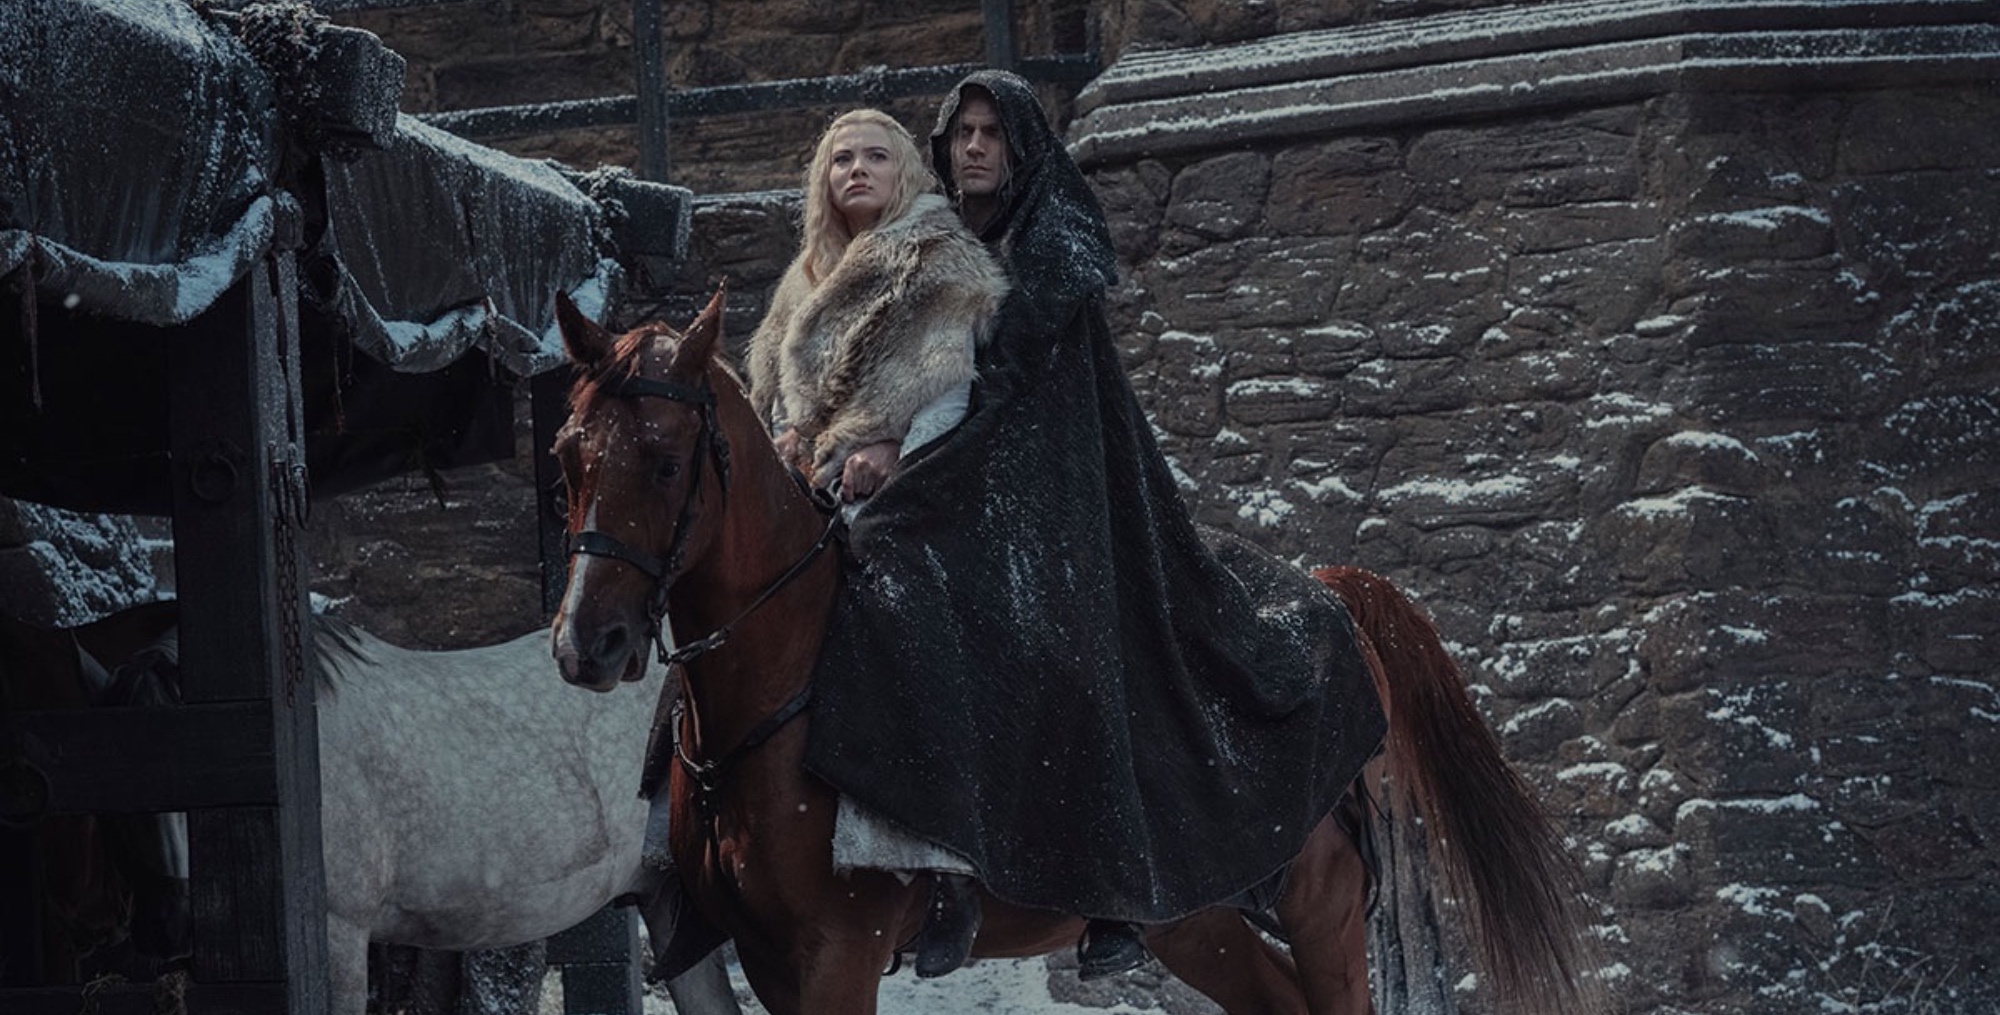 Ciri, Geralt and Roach in 'The Witcher' Season 2 wearing cloaks on top of horse.